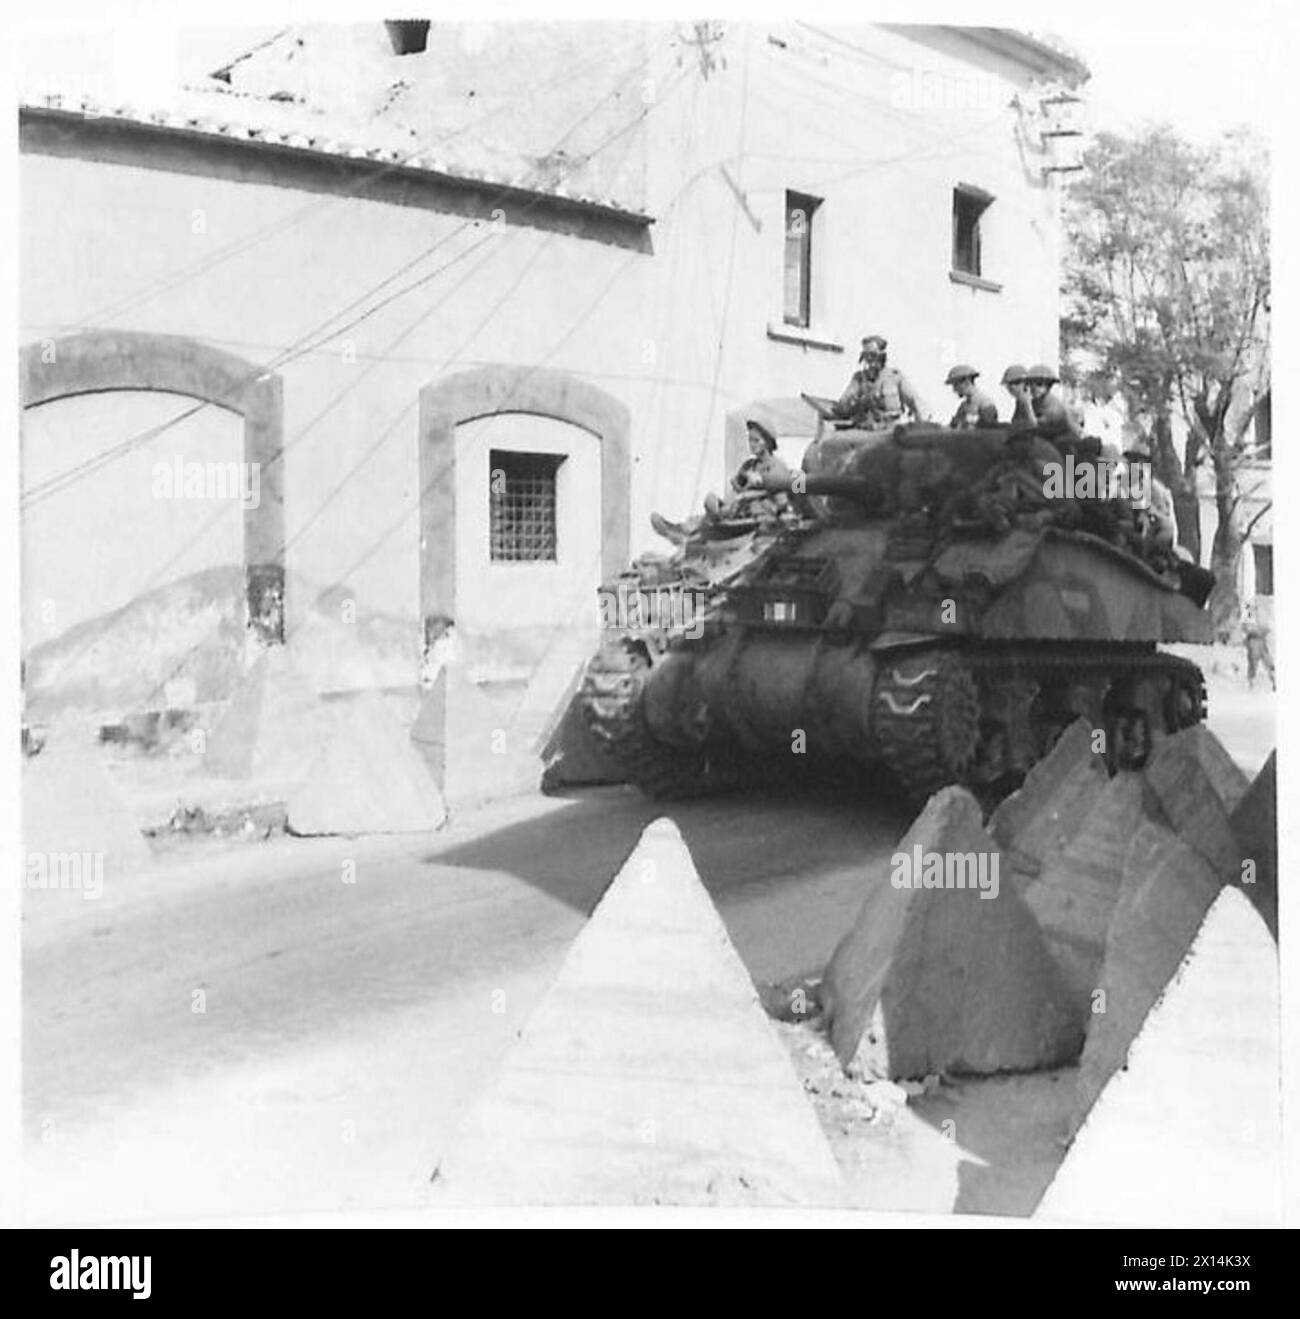 SALERNO : BRITISH TROOPS ENTER THE TOWN : FIFTH ARMY - A Sherman tank passing through some of the road blocks on the outskirts of Salerno British Army Stock Photo